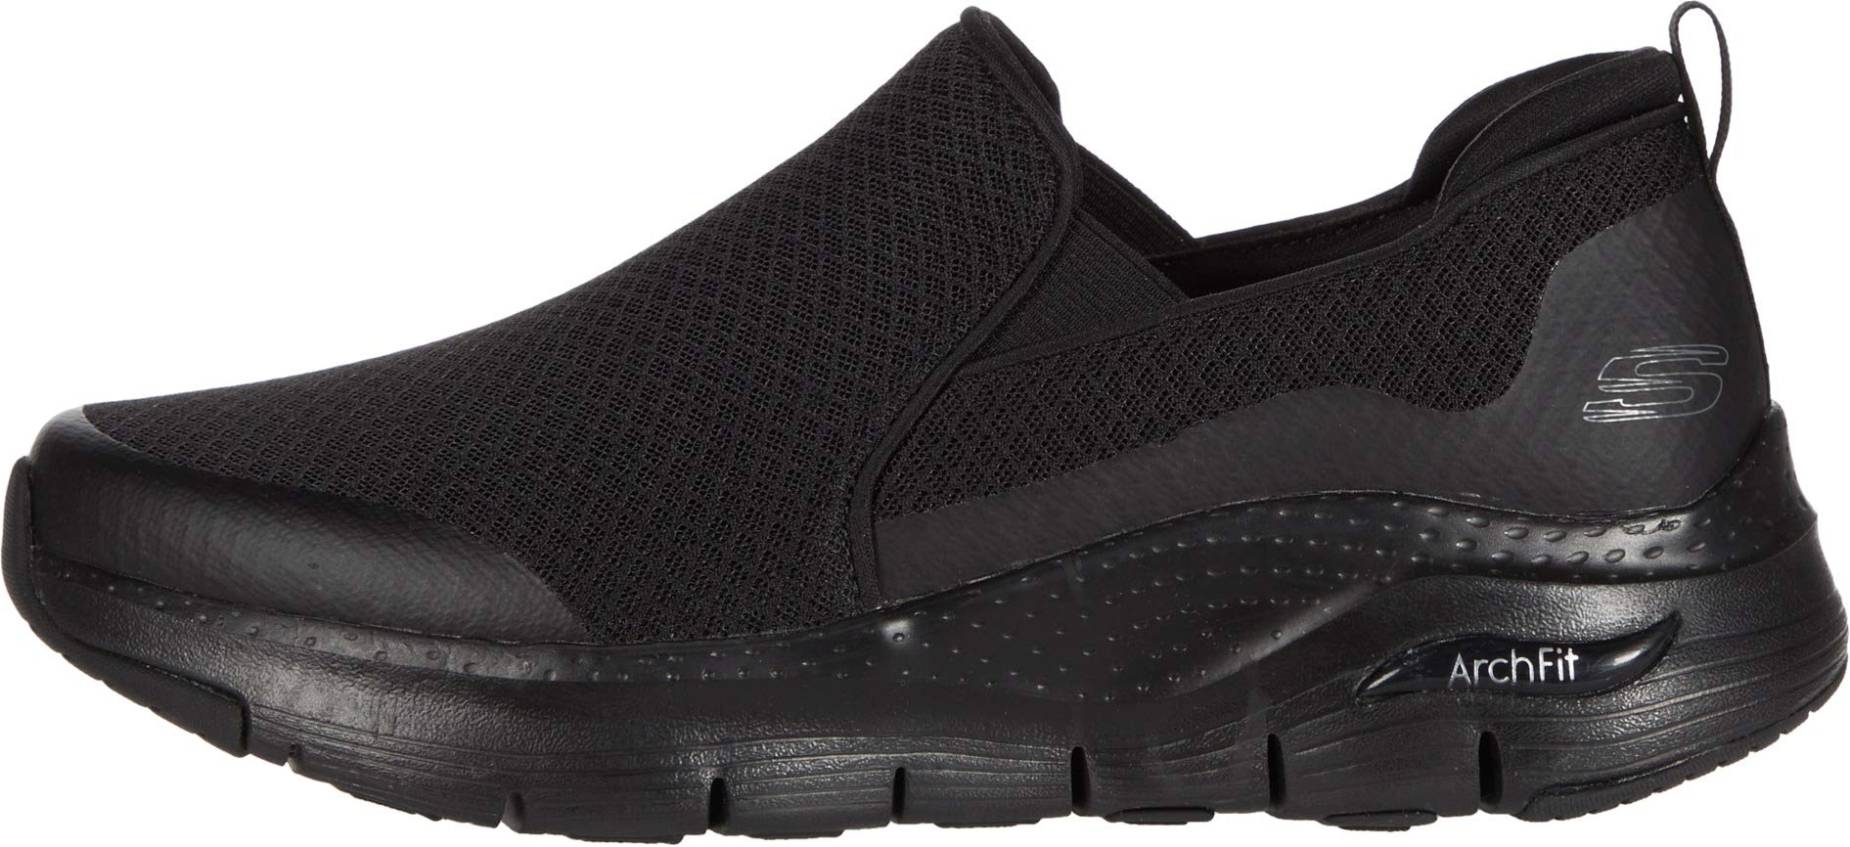 Skechers Arch Fit Banlin Review 2022, Facts, Deals | RunRepeat